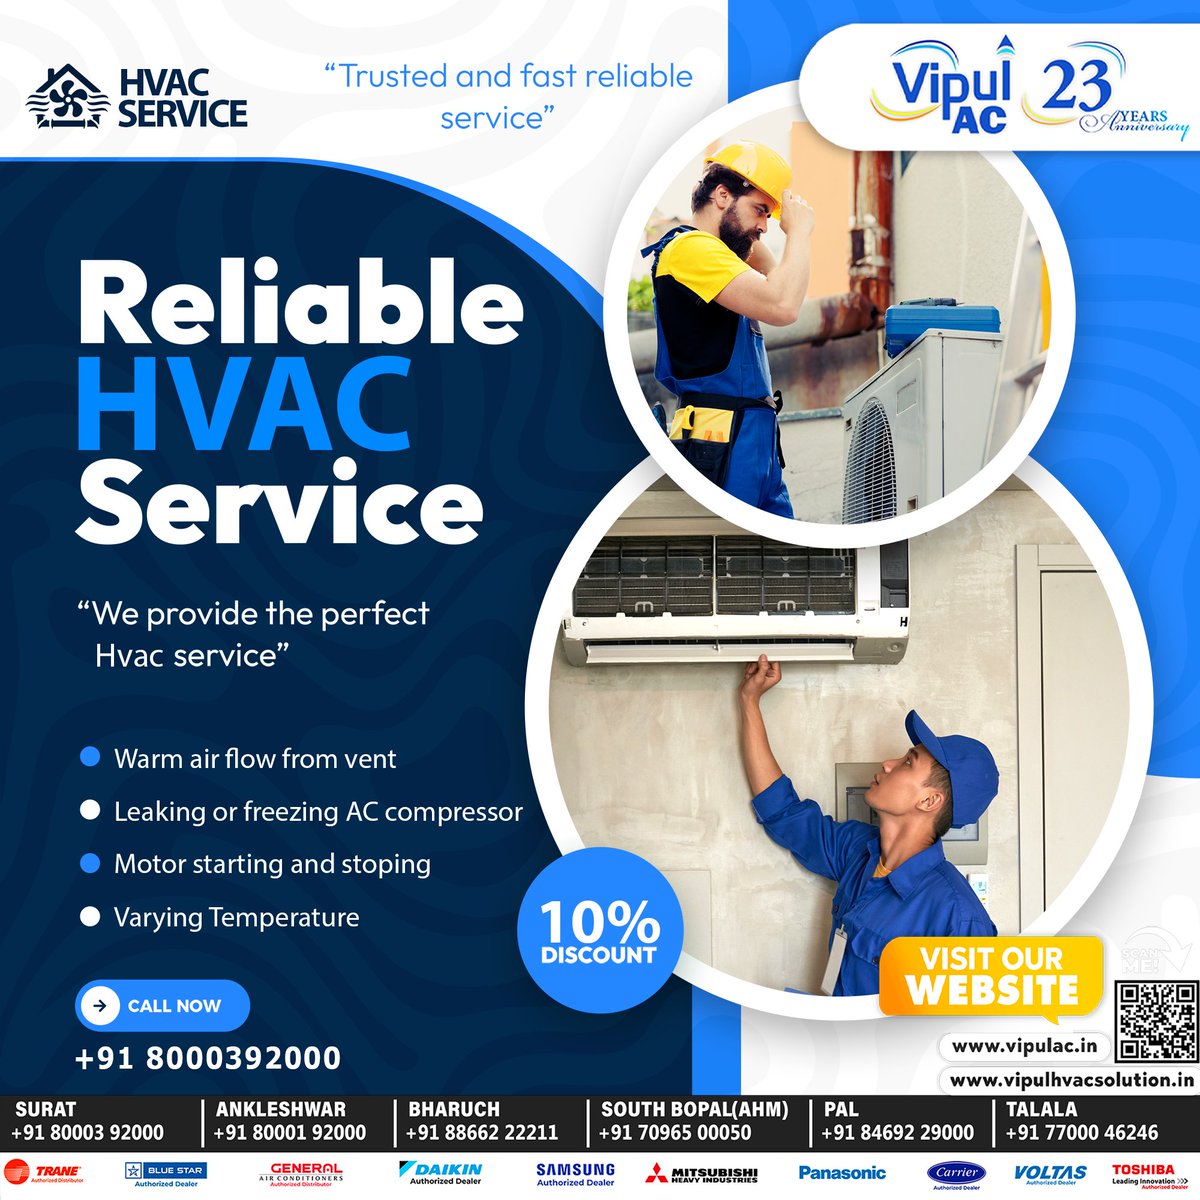 Need information or have any inquiries about AC and hvac units? Call us now and we'll be happy to assist you.
#acrepair #acmaintenance #hvacengineer #hvacrepair #chillermaintenence #services #acinstallation #vipulairconditioner #vipulhvac #vipulhvacsolution #Daikin #bluestarac